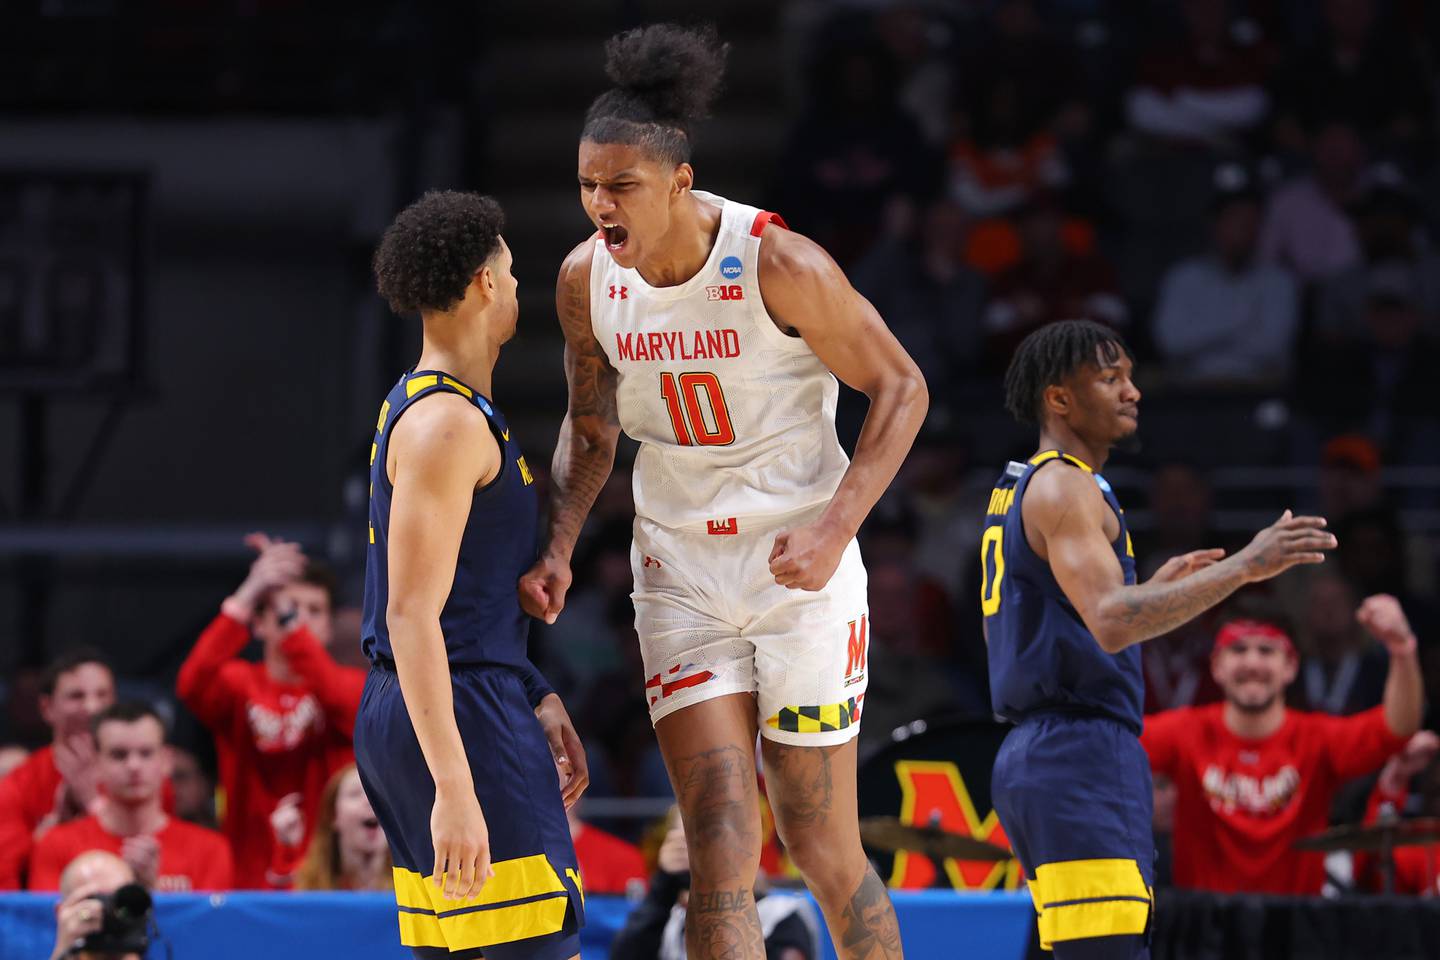 BIRMINGHAM, ALABAMA - MARCH 16: Julian Reese #10 of the Maryland Terrapins reacts after a made basket against the West Virginia Mountaineers during the second half in the first round of the NCAA Men's Basketball Tournament at Legacy Arena at the BJCC on March 16, 2023 in Birmingham, Alabama.